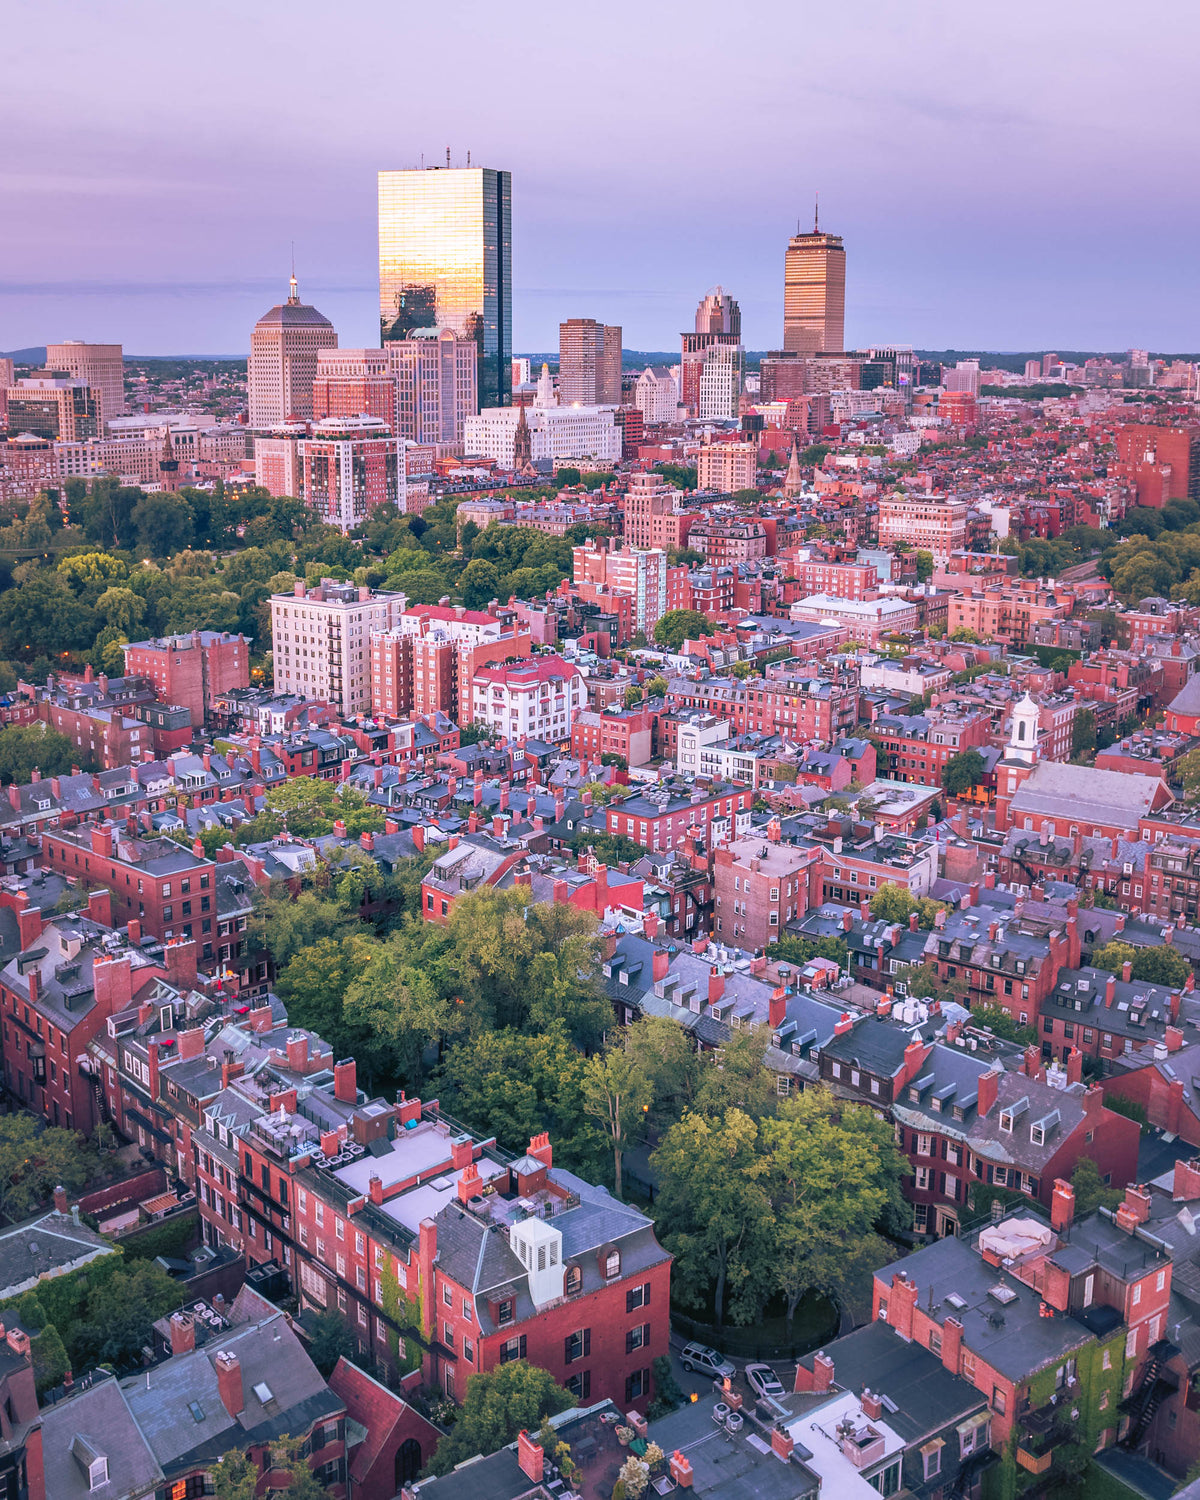 VIEW OF BOSTON FROM BEACON HILL